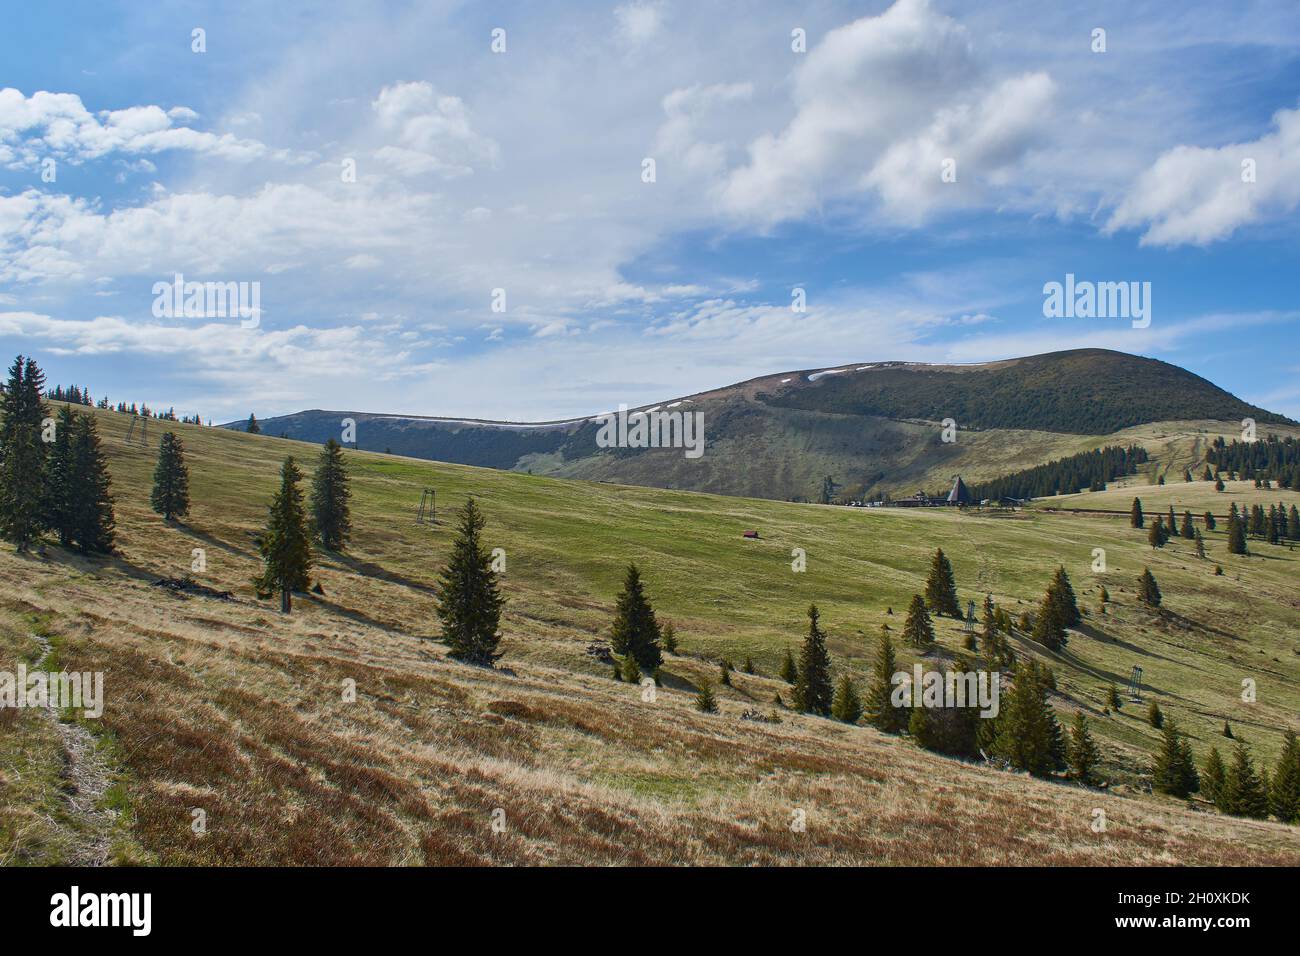 Panoramic view from the ski slope in mountains Sureanu with peak cloud sky and fir trees Stock Photo